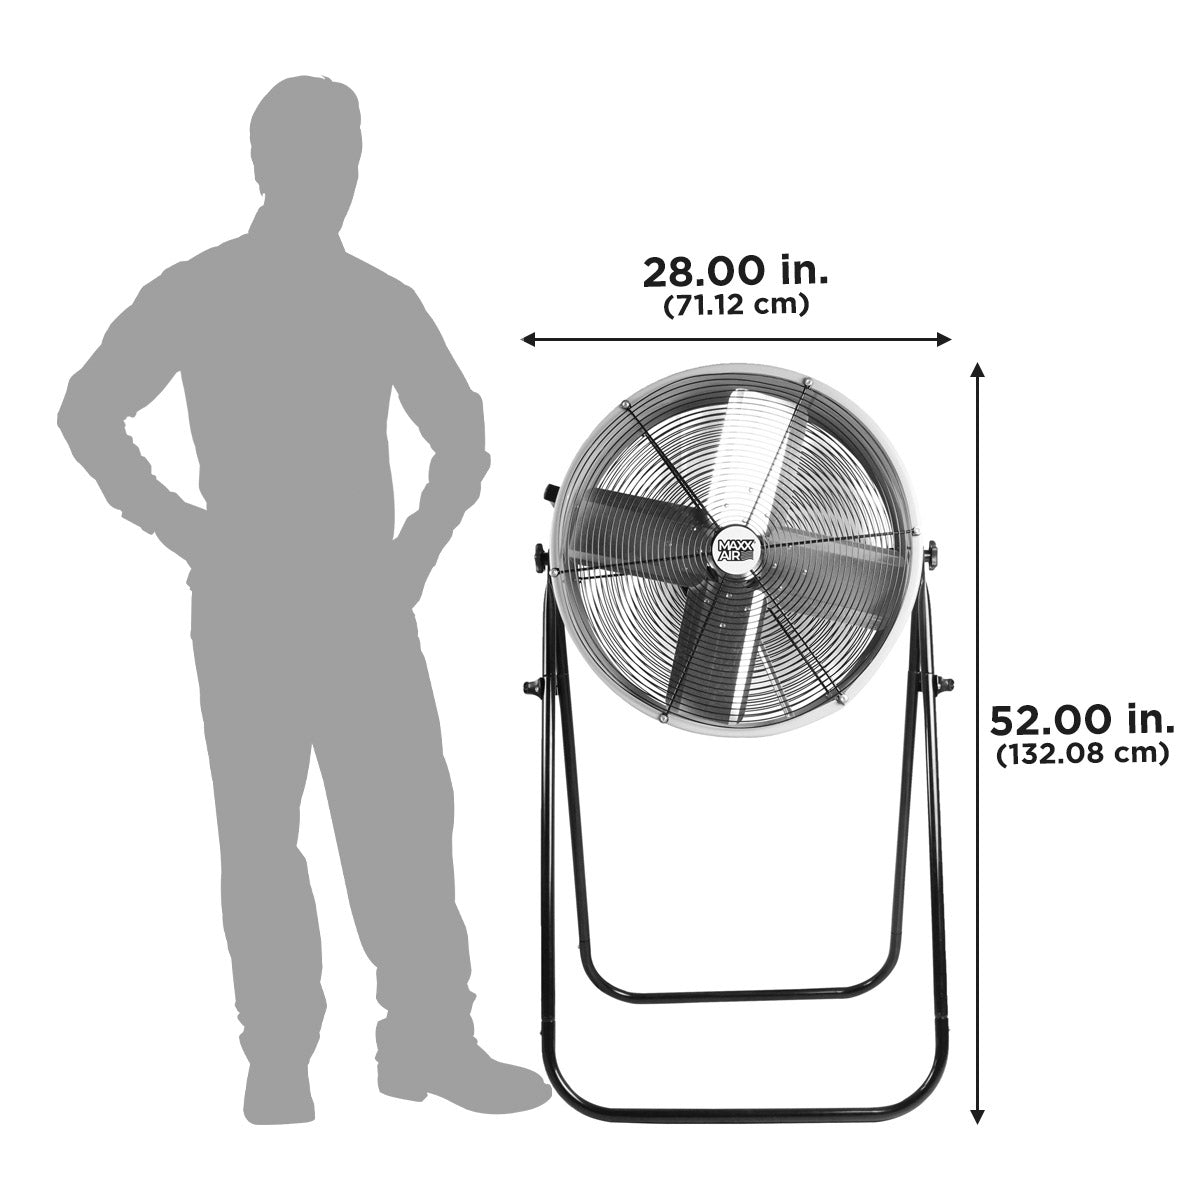 Maxx Air 24 In. 2-Speed Tilting Direct Drive Drum Fan with Extension Legs